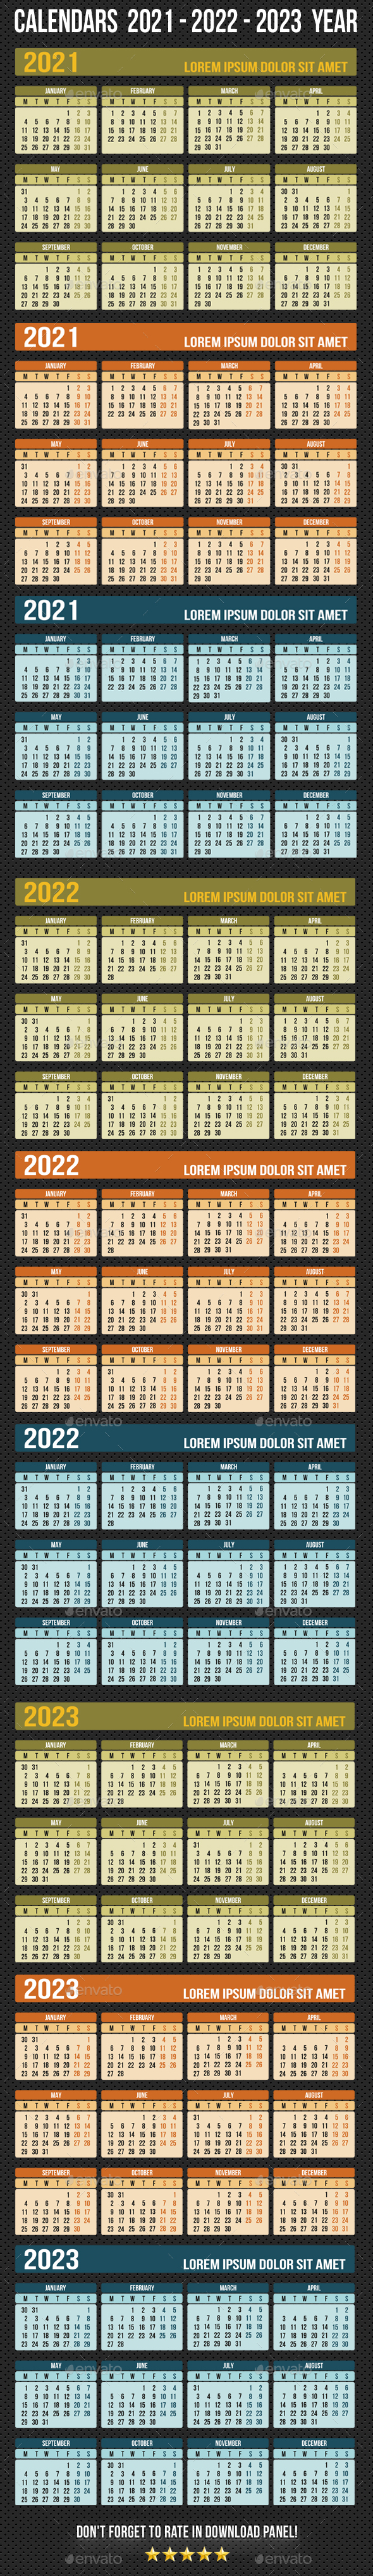 Calendars 2021 - 2022 - 2023 Year By Rapidgraf | Graphicriver